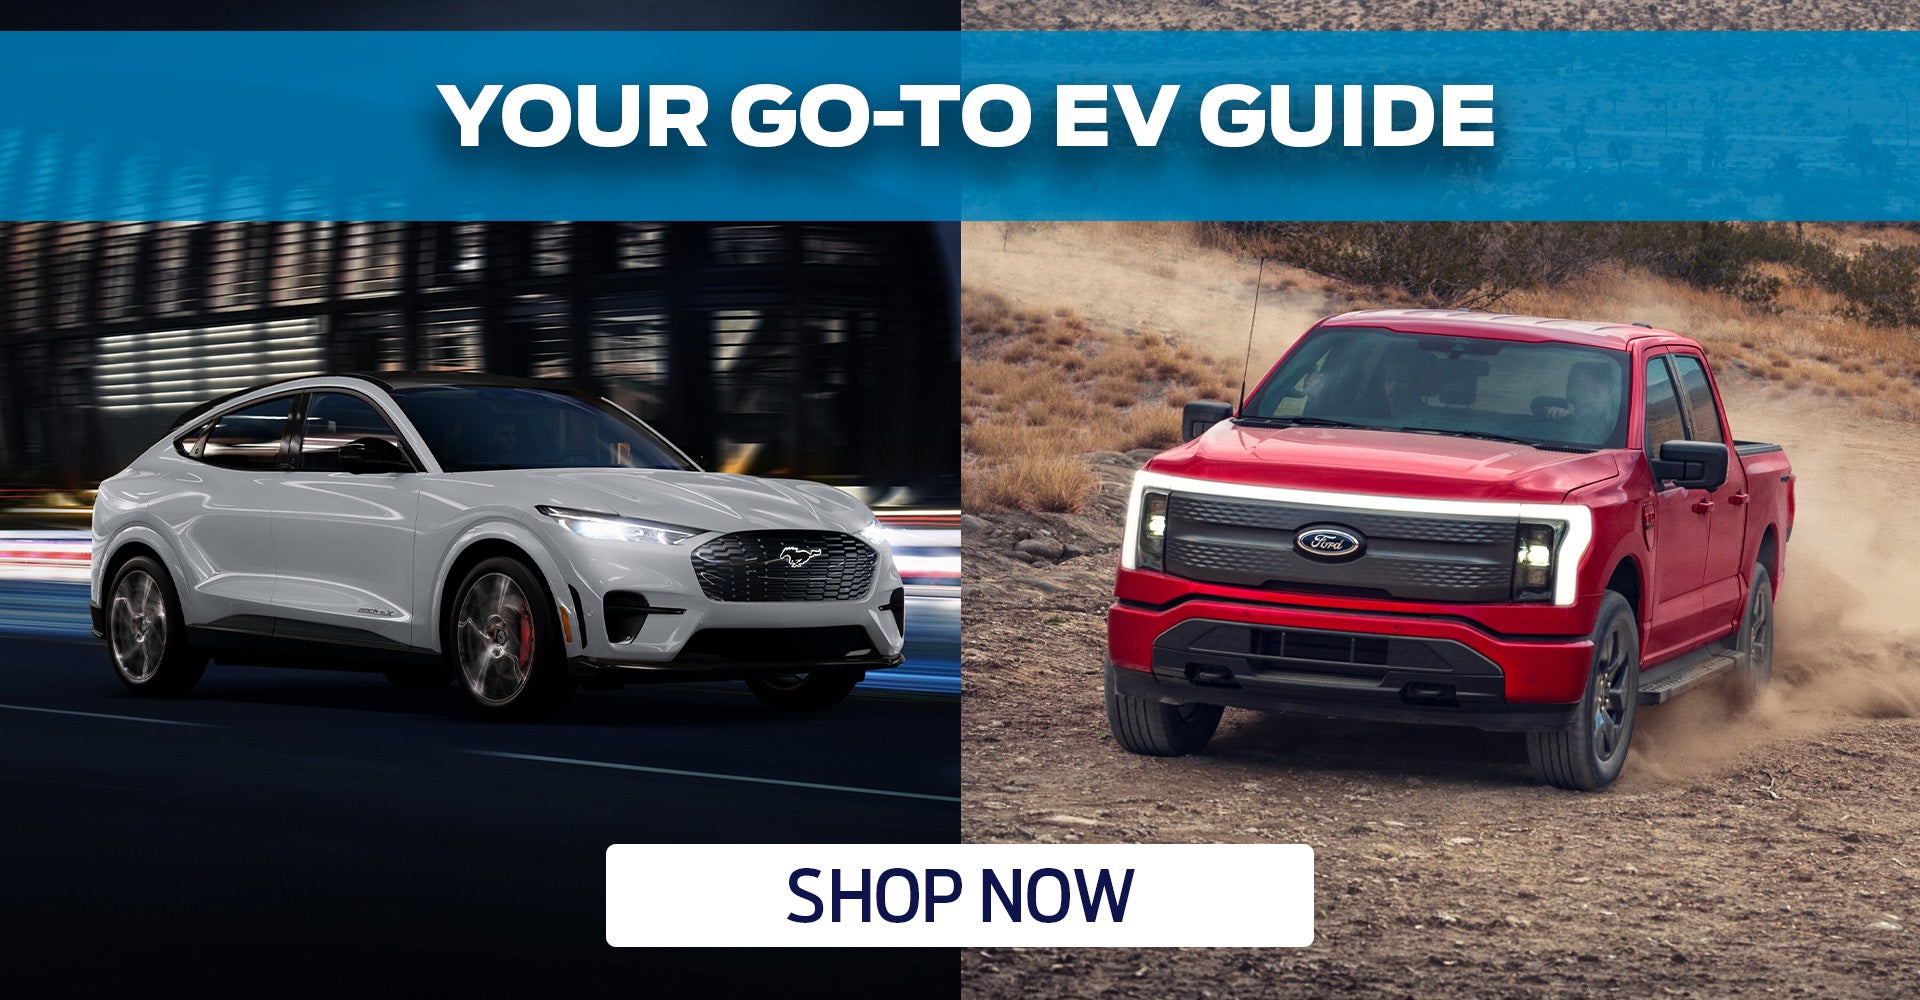 Everything You Need to Know Before Making the Switch to an EV